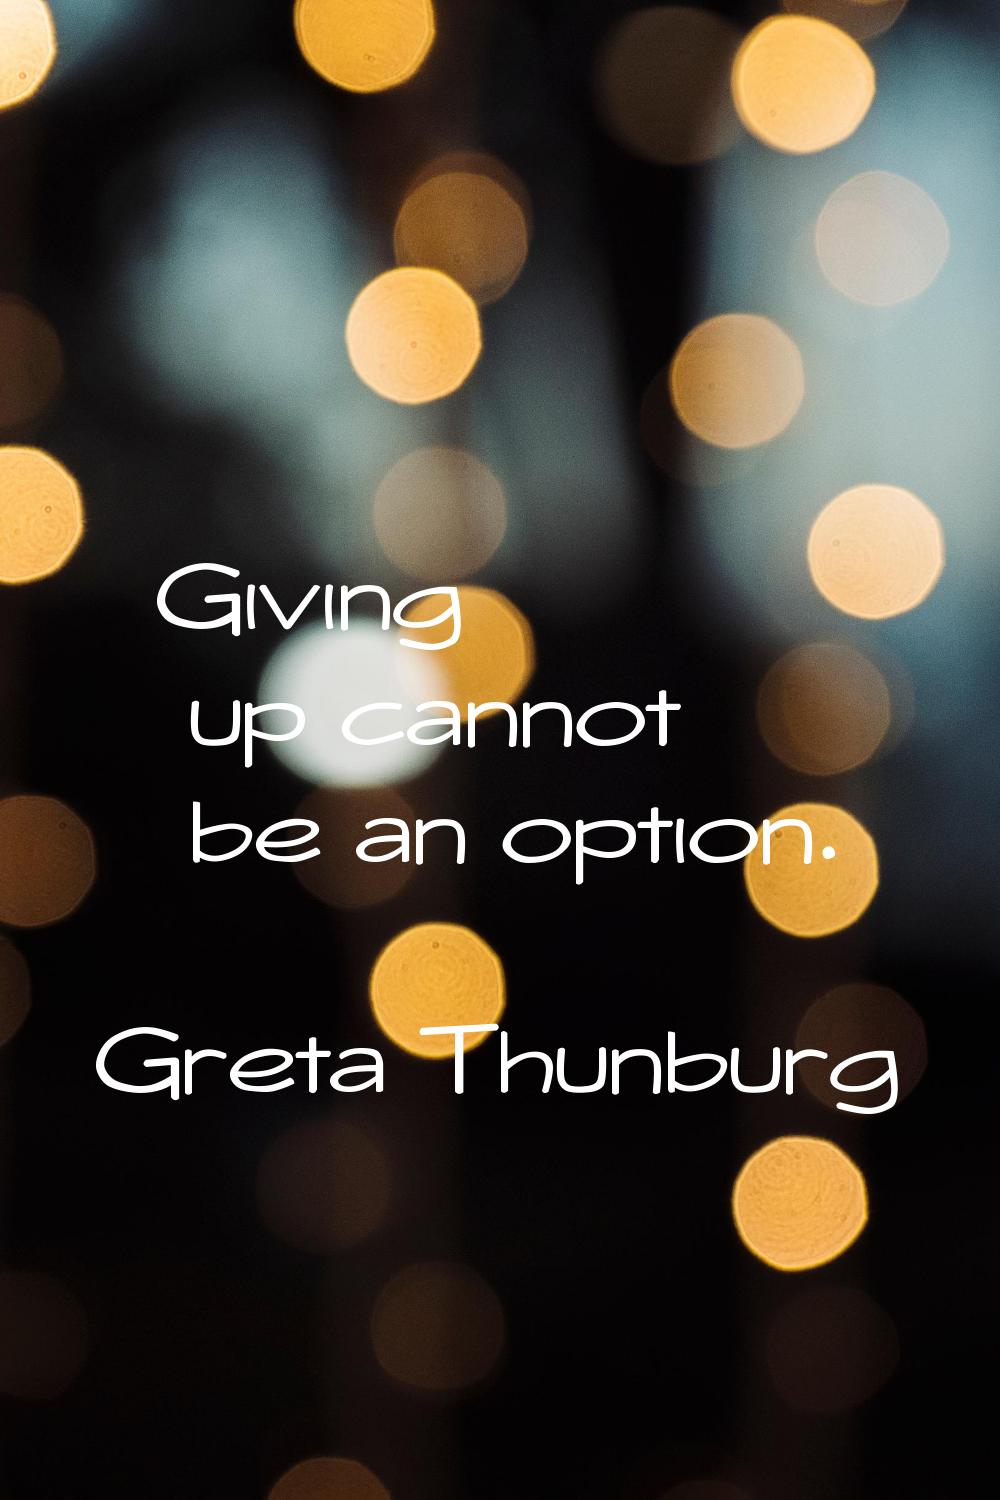 Giving up cannot be an option.